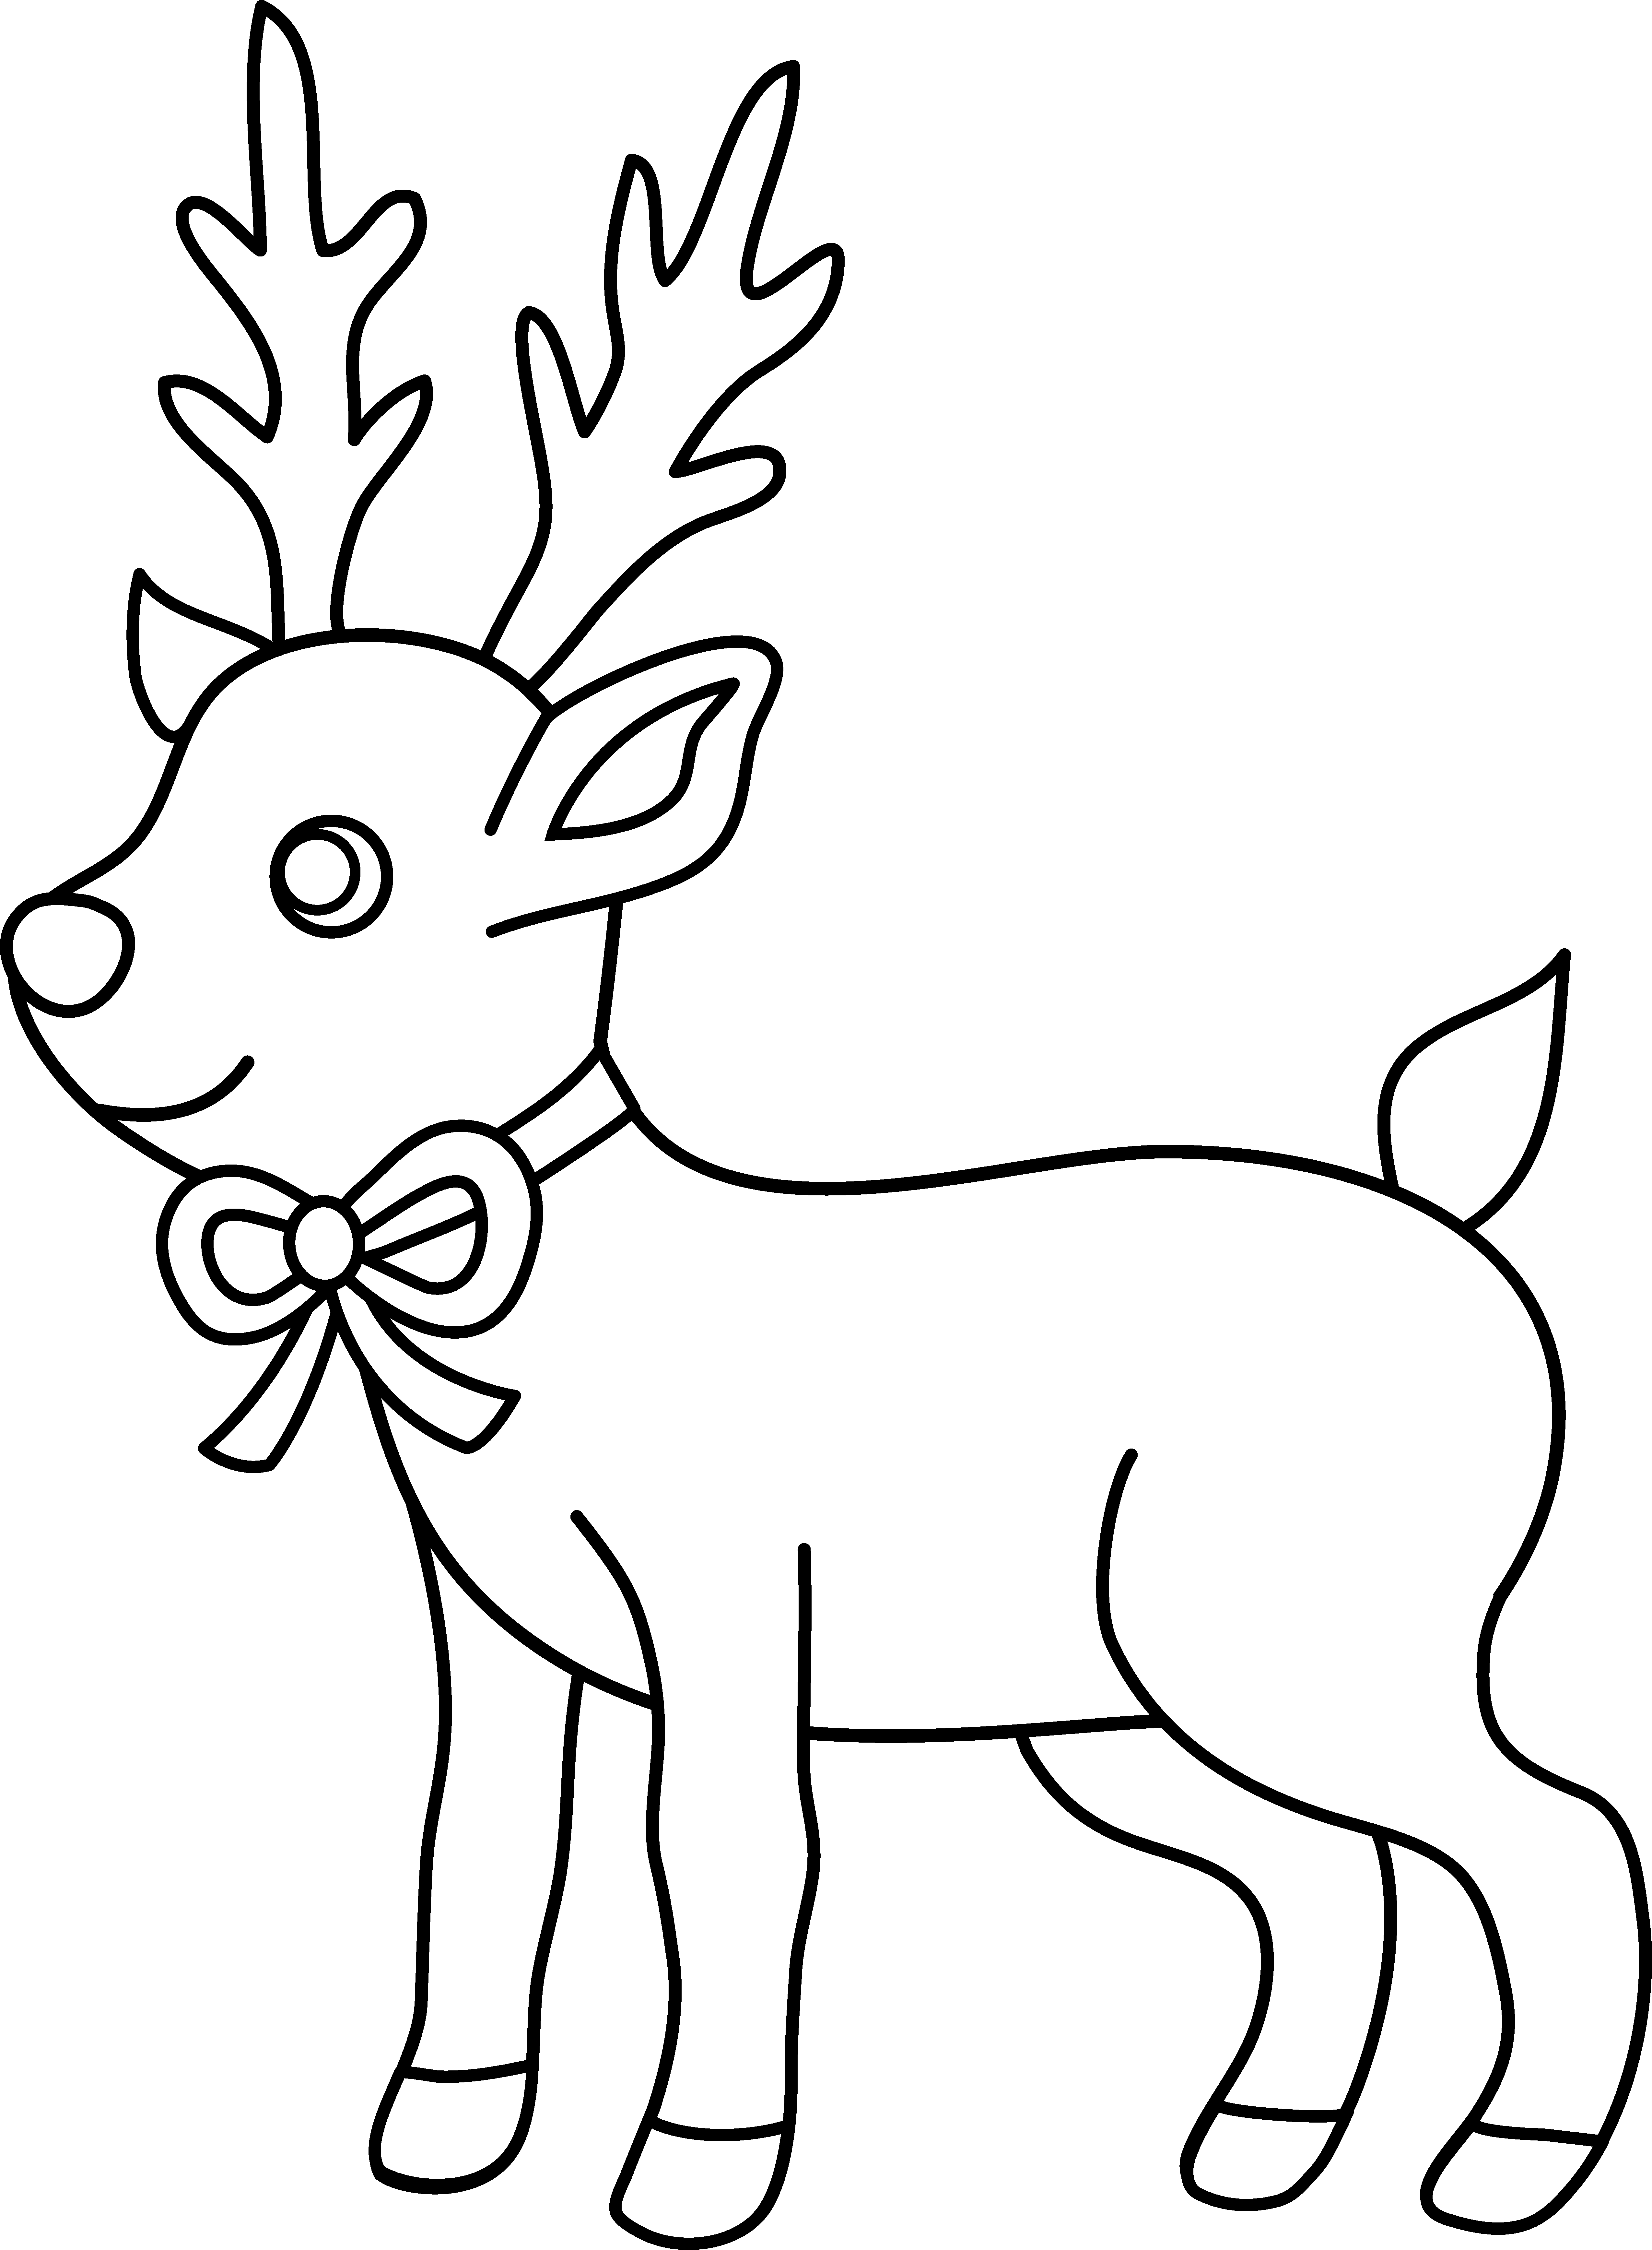 80 Cute Reindeer Coloring Pages  Latest HD